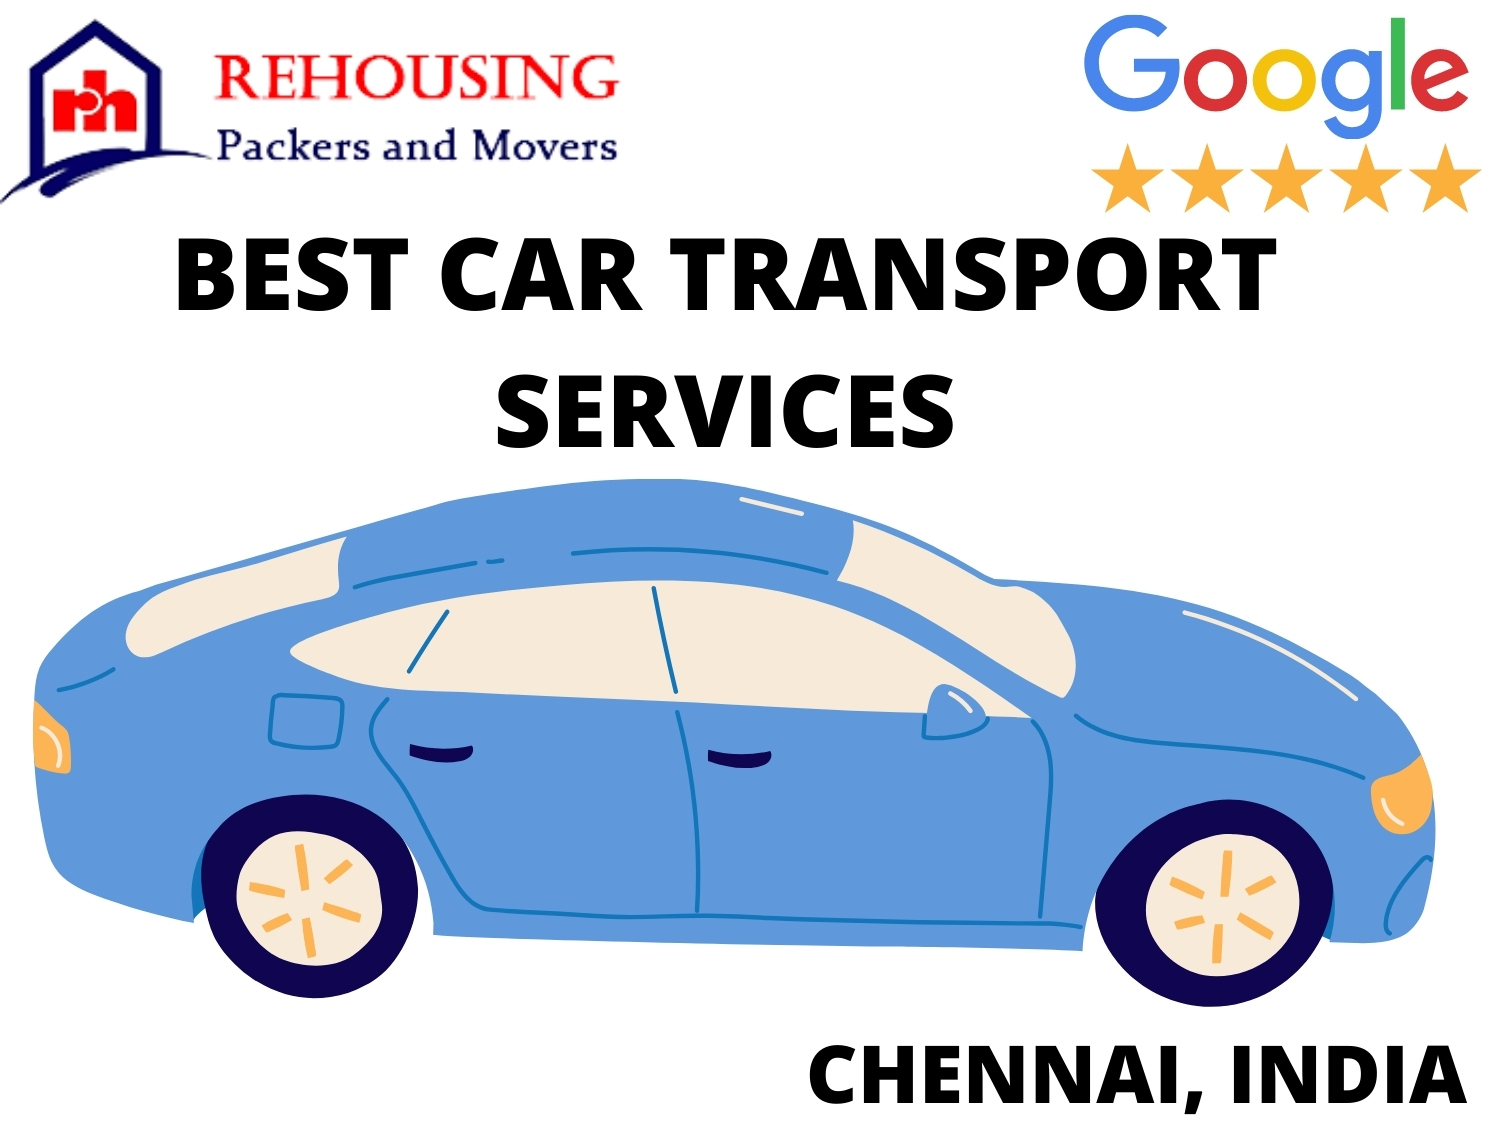 Car transport service in Chennai helps clients arrange for insurance documents, saves them time and money, and provides various services